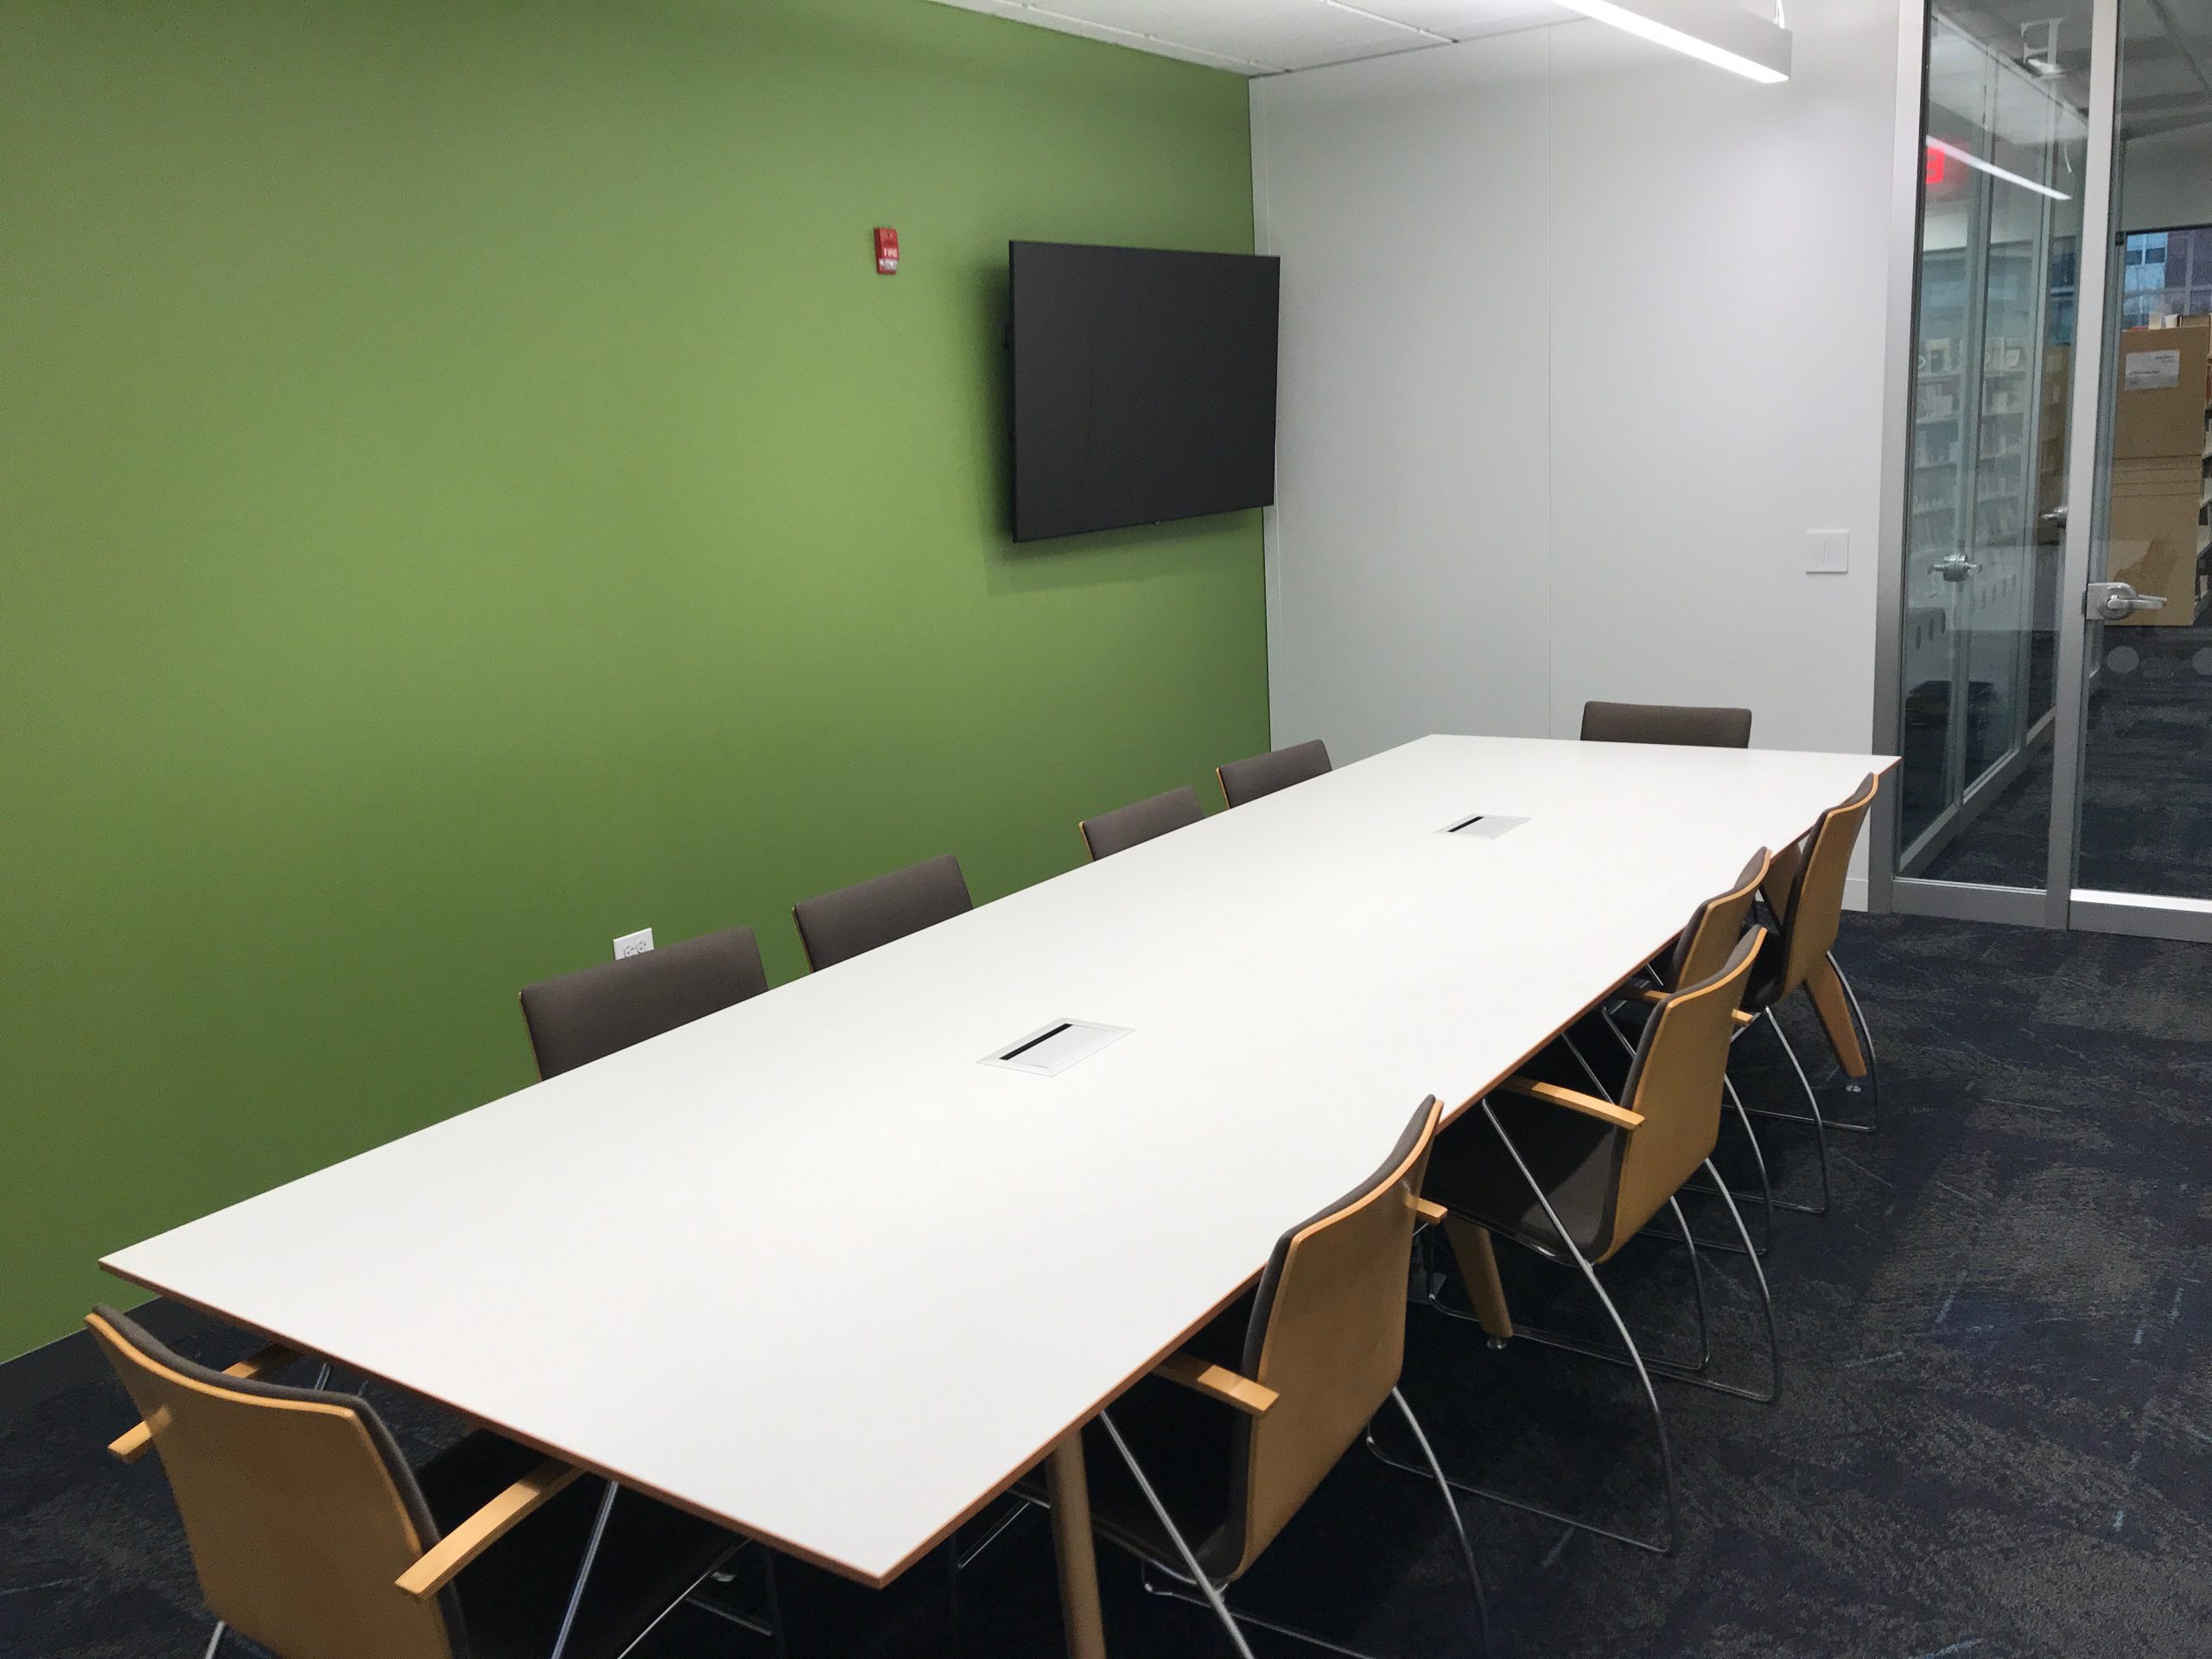 Image of conference room at Aspen Drive Library, shows a long conference table with eight chairs around it. A monitor is in the corner.